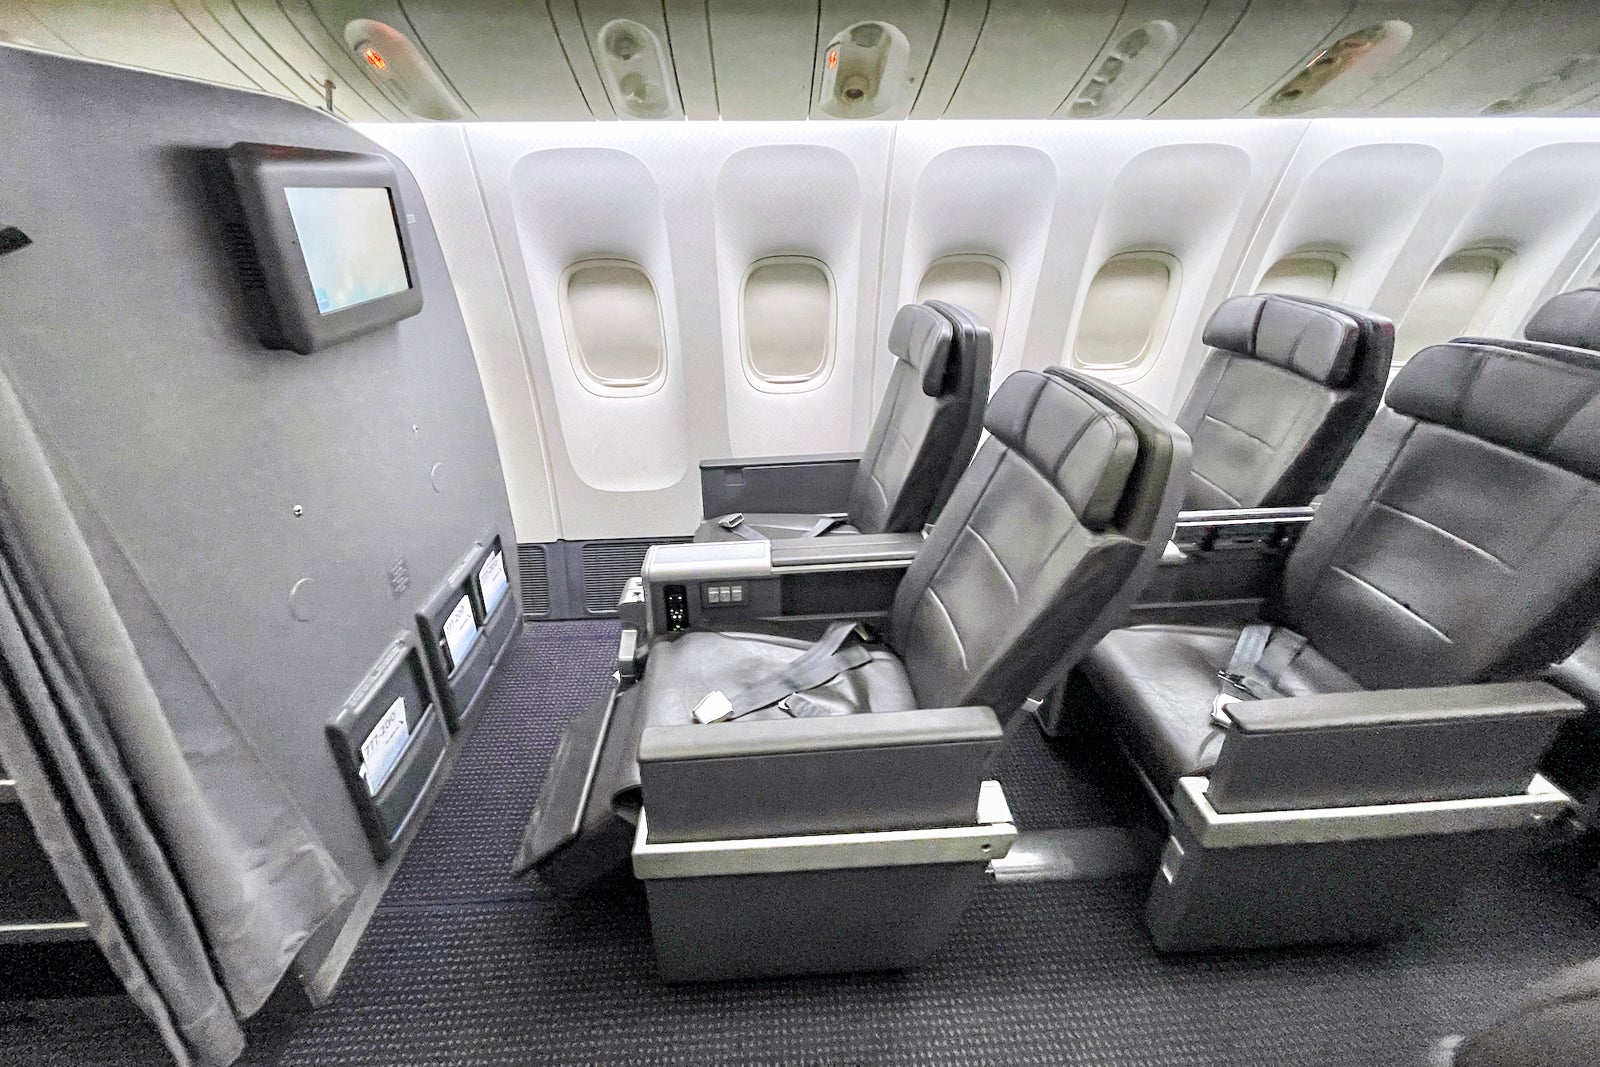 Airline review: American Airlines premium economy